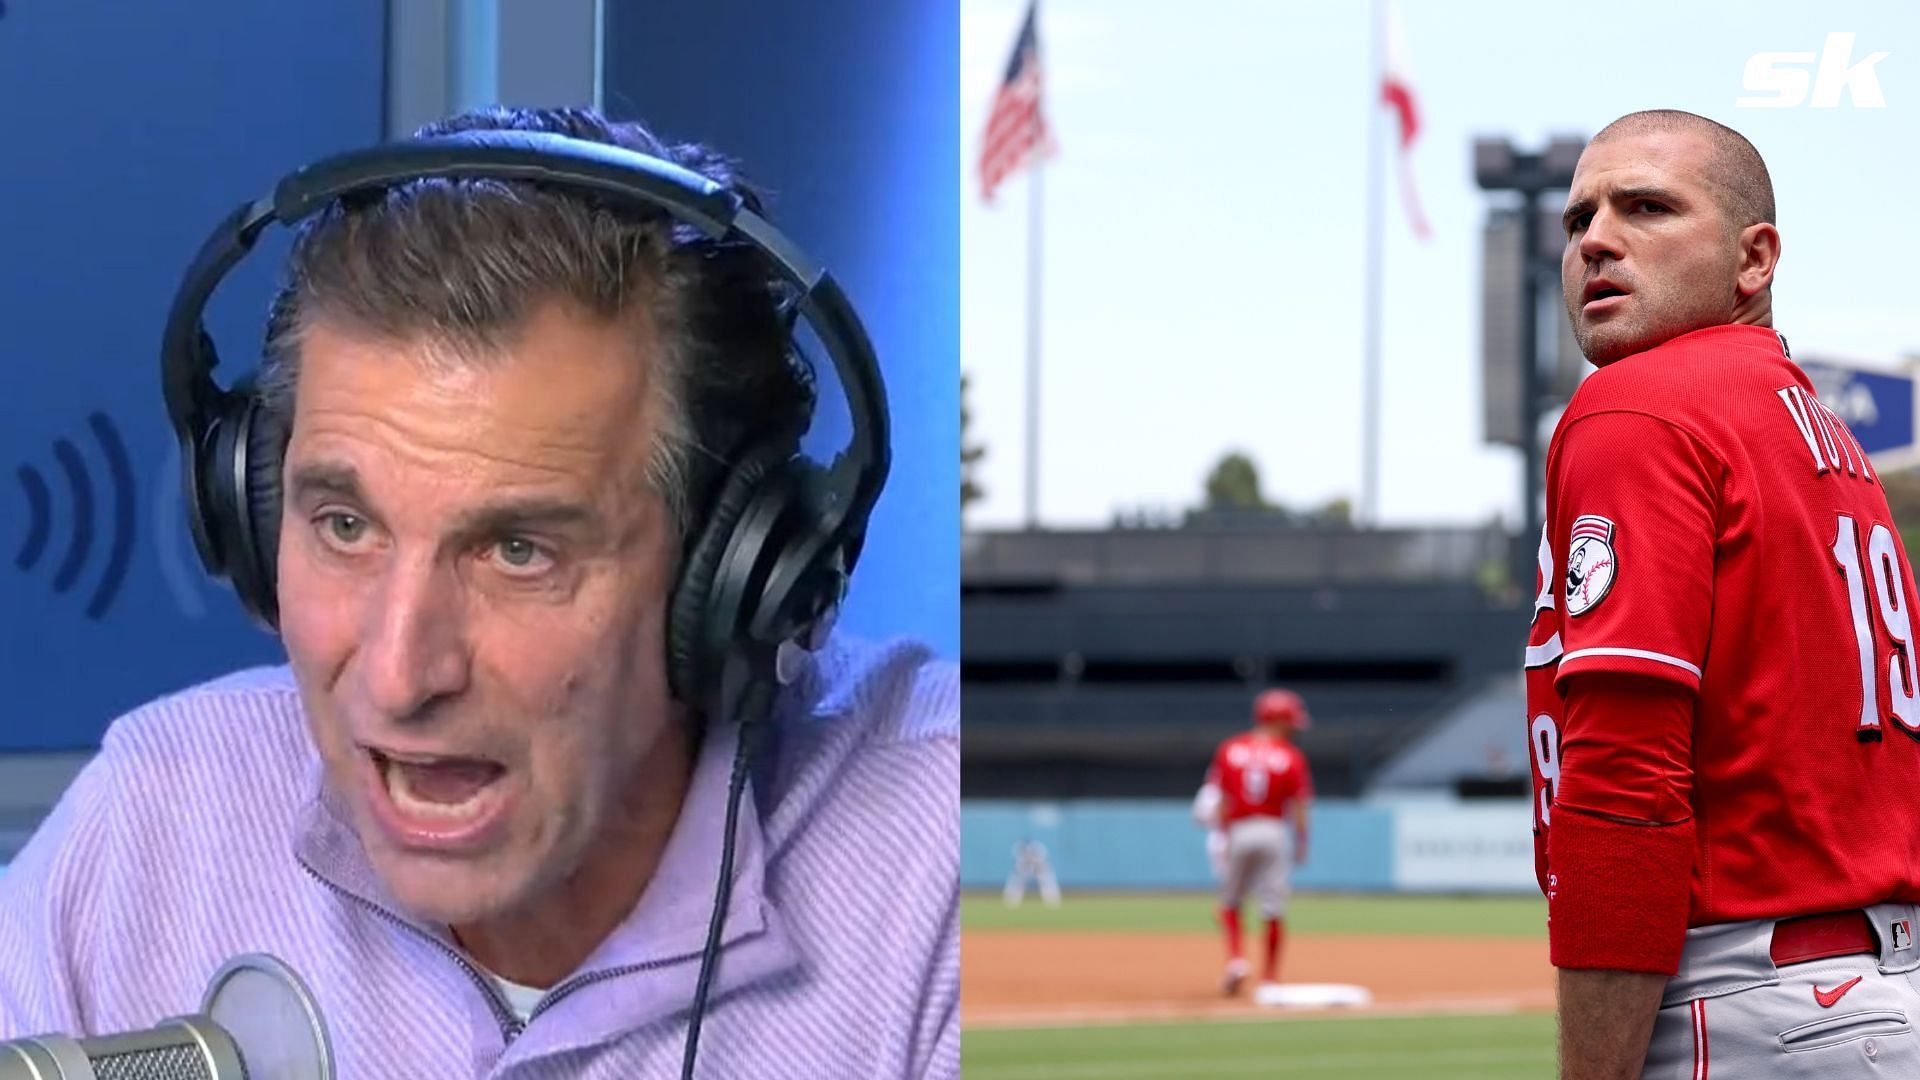 Joey Votto has hit back at radio host Chris Russo